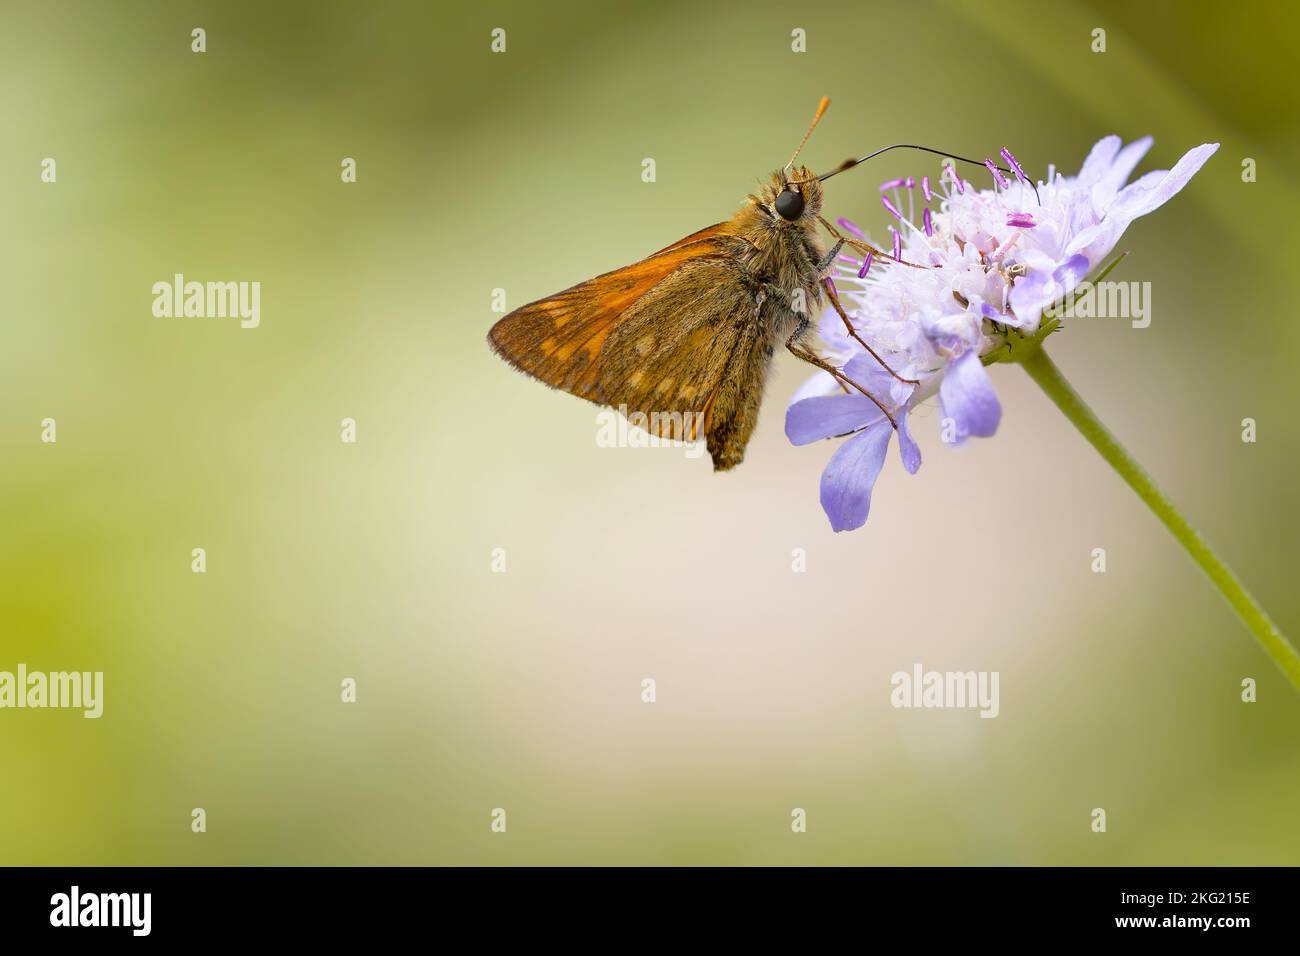 ochlodes sylvania butterfly on a lilac flower with green background. macro nature photography. insects and plants. Copy space Stock Photo